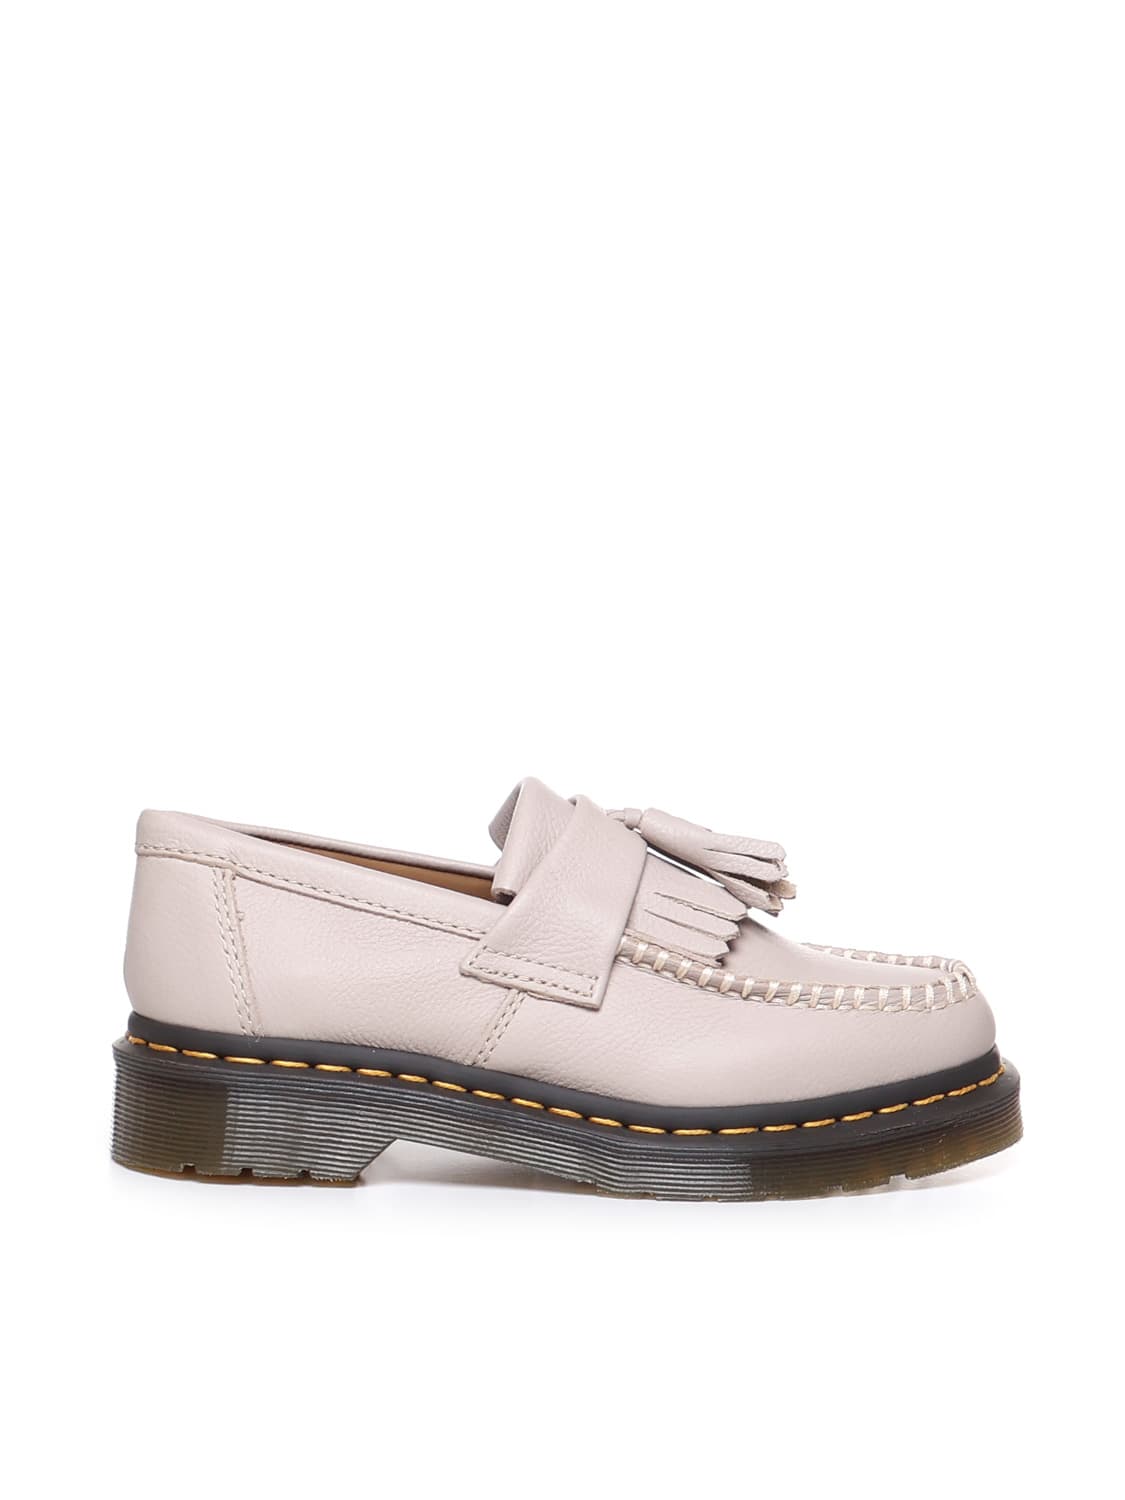 Dr. Martens Adrian Moccasins With Tassels In Virginia Leather